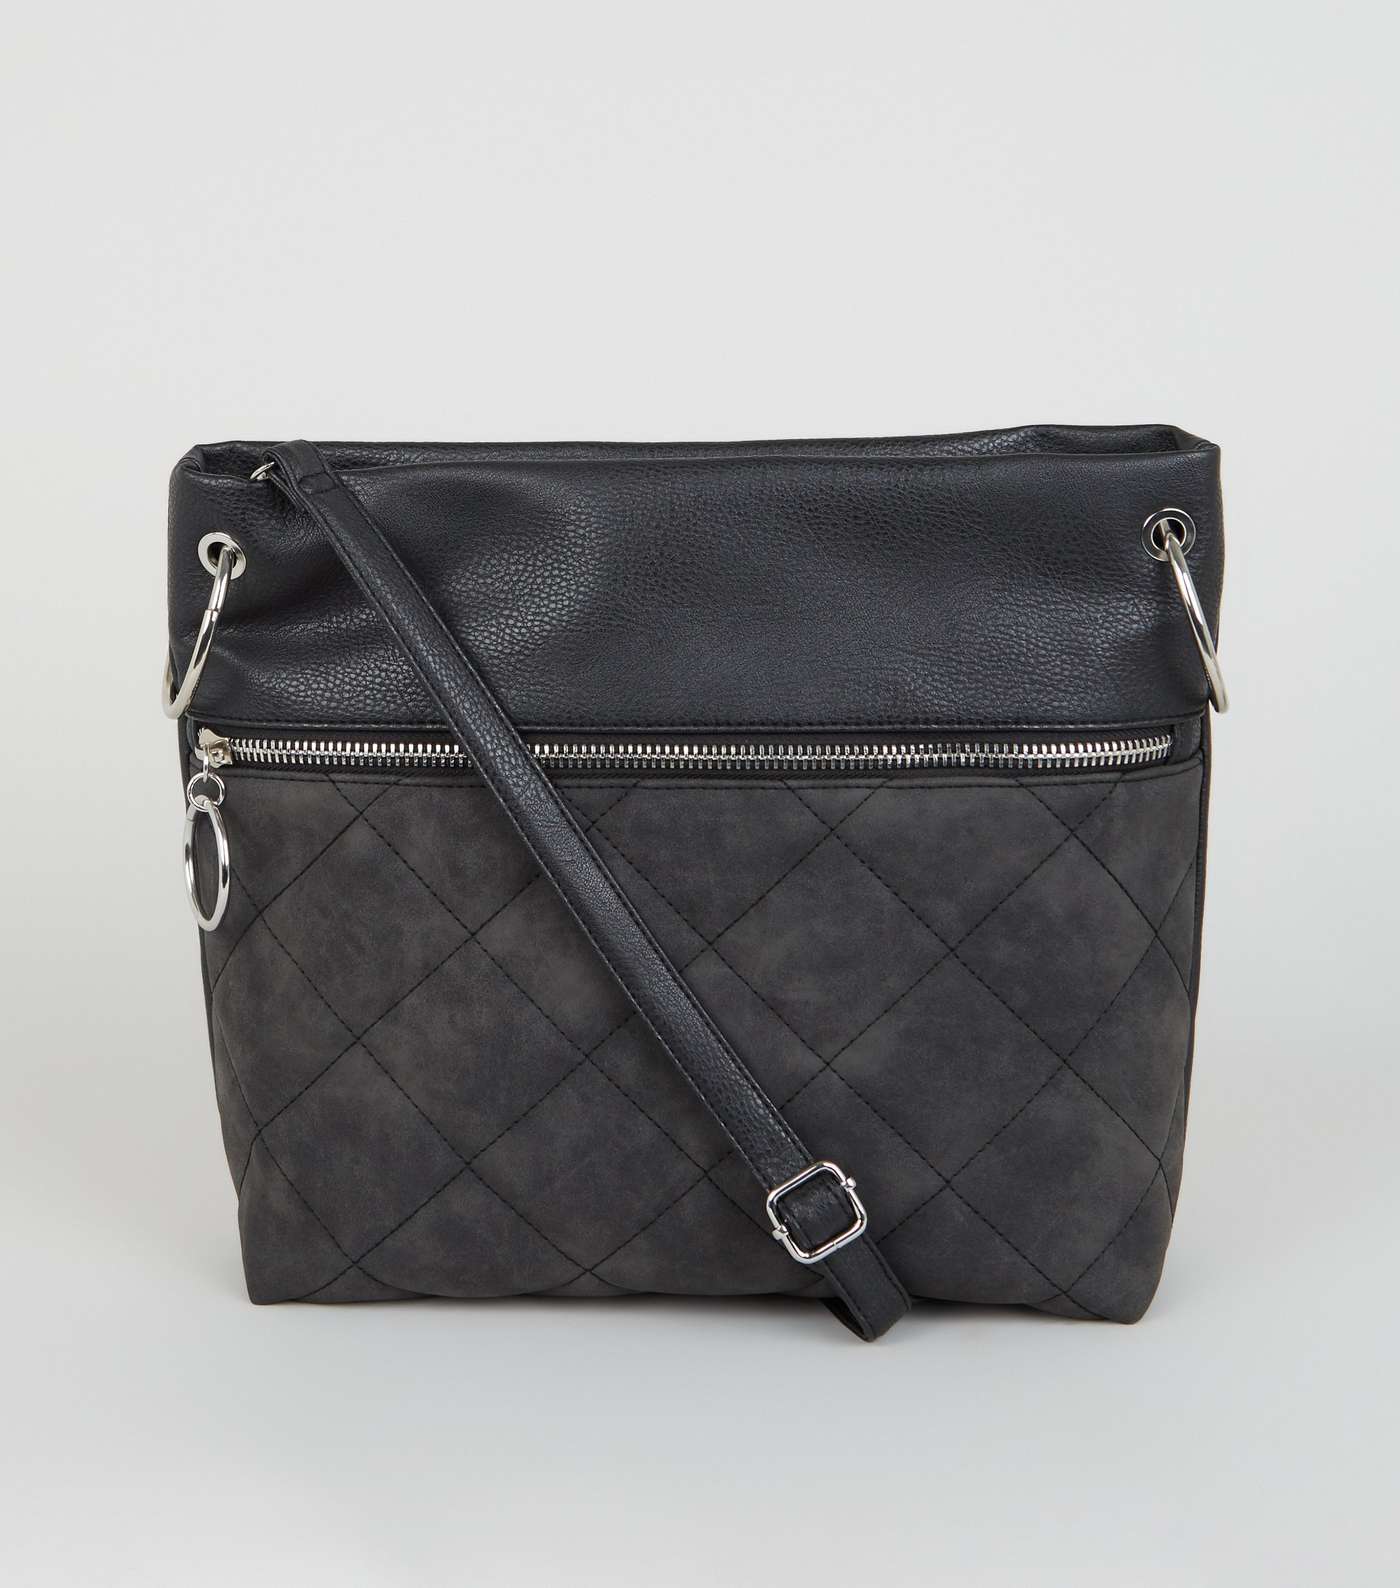 Black Leather-Look Quilted Cross Body Bag